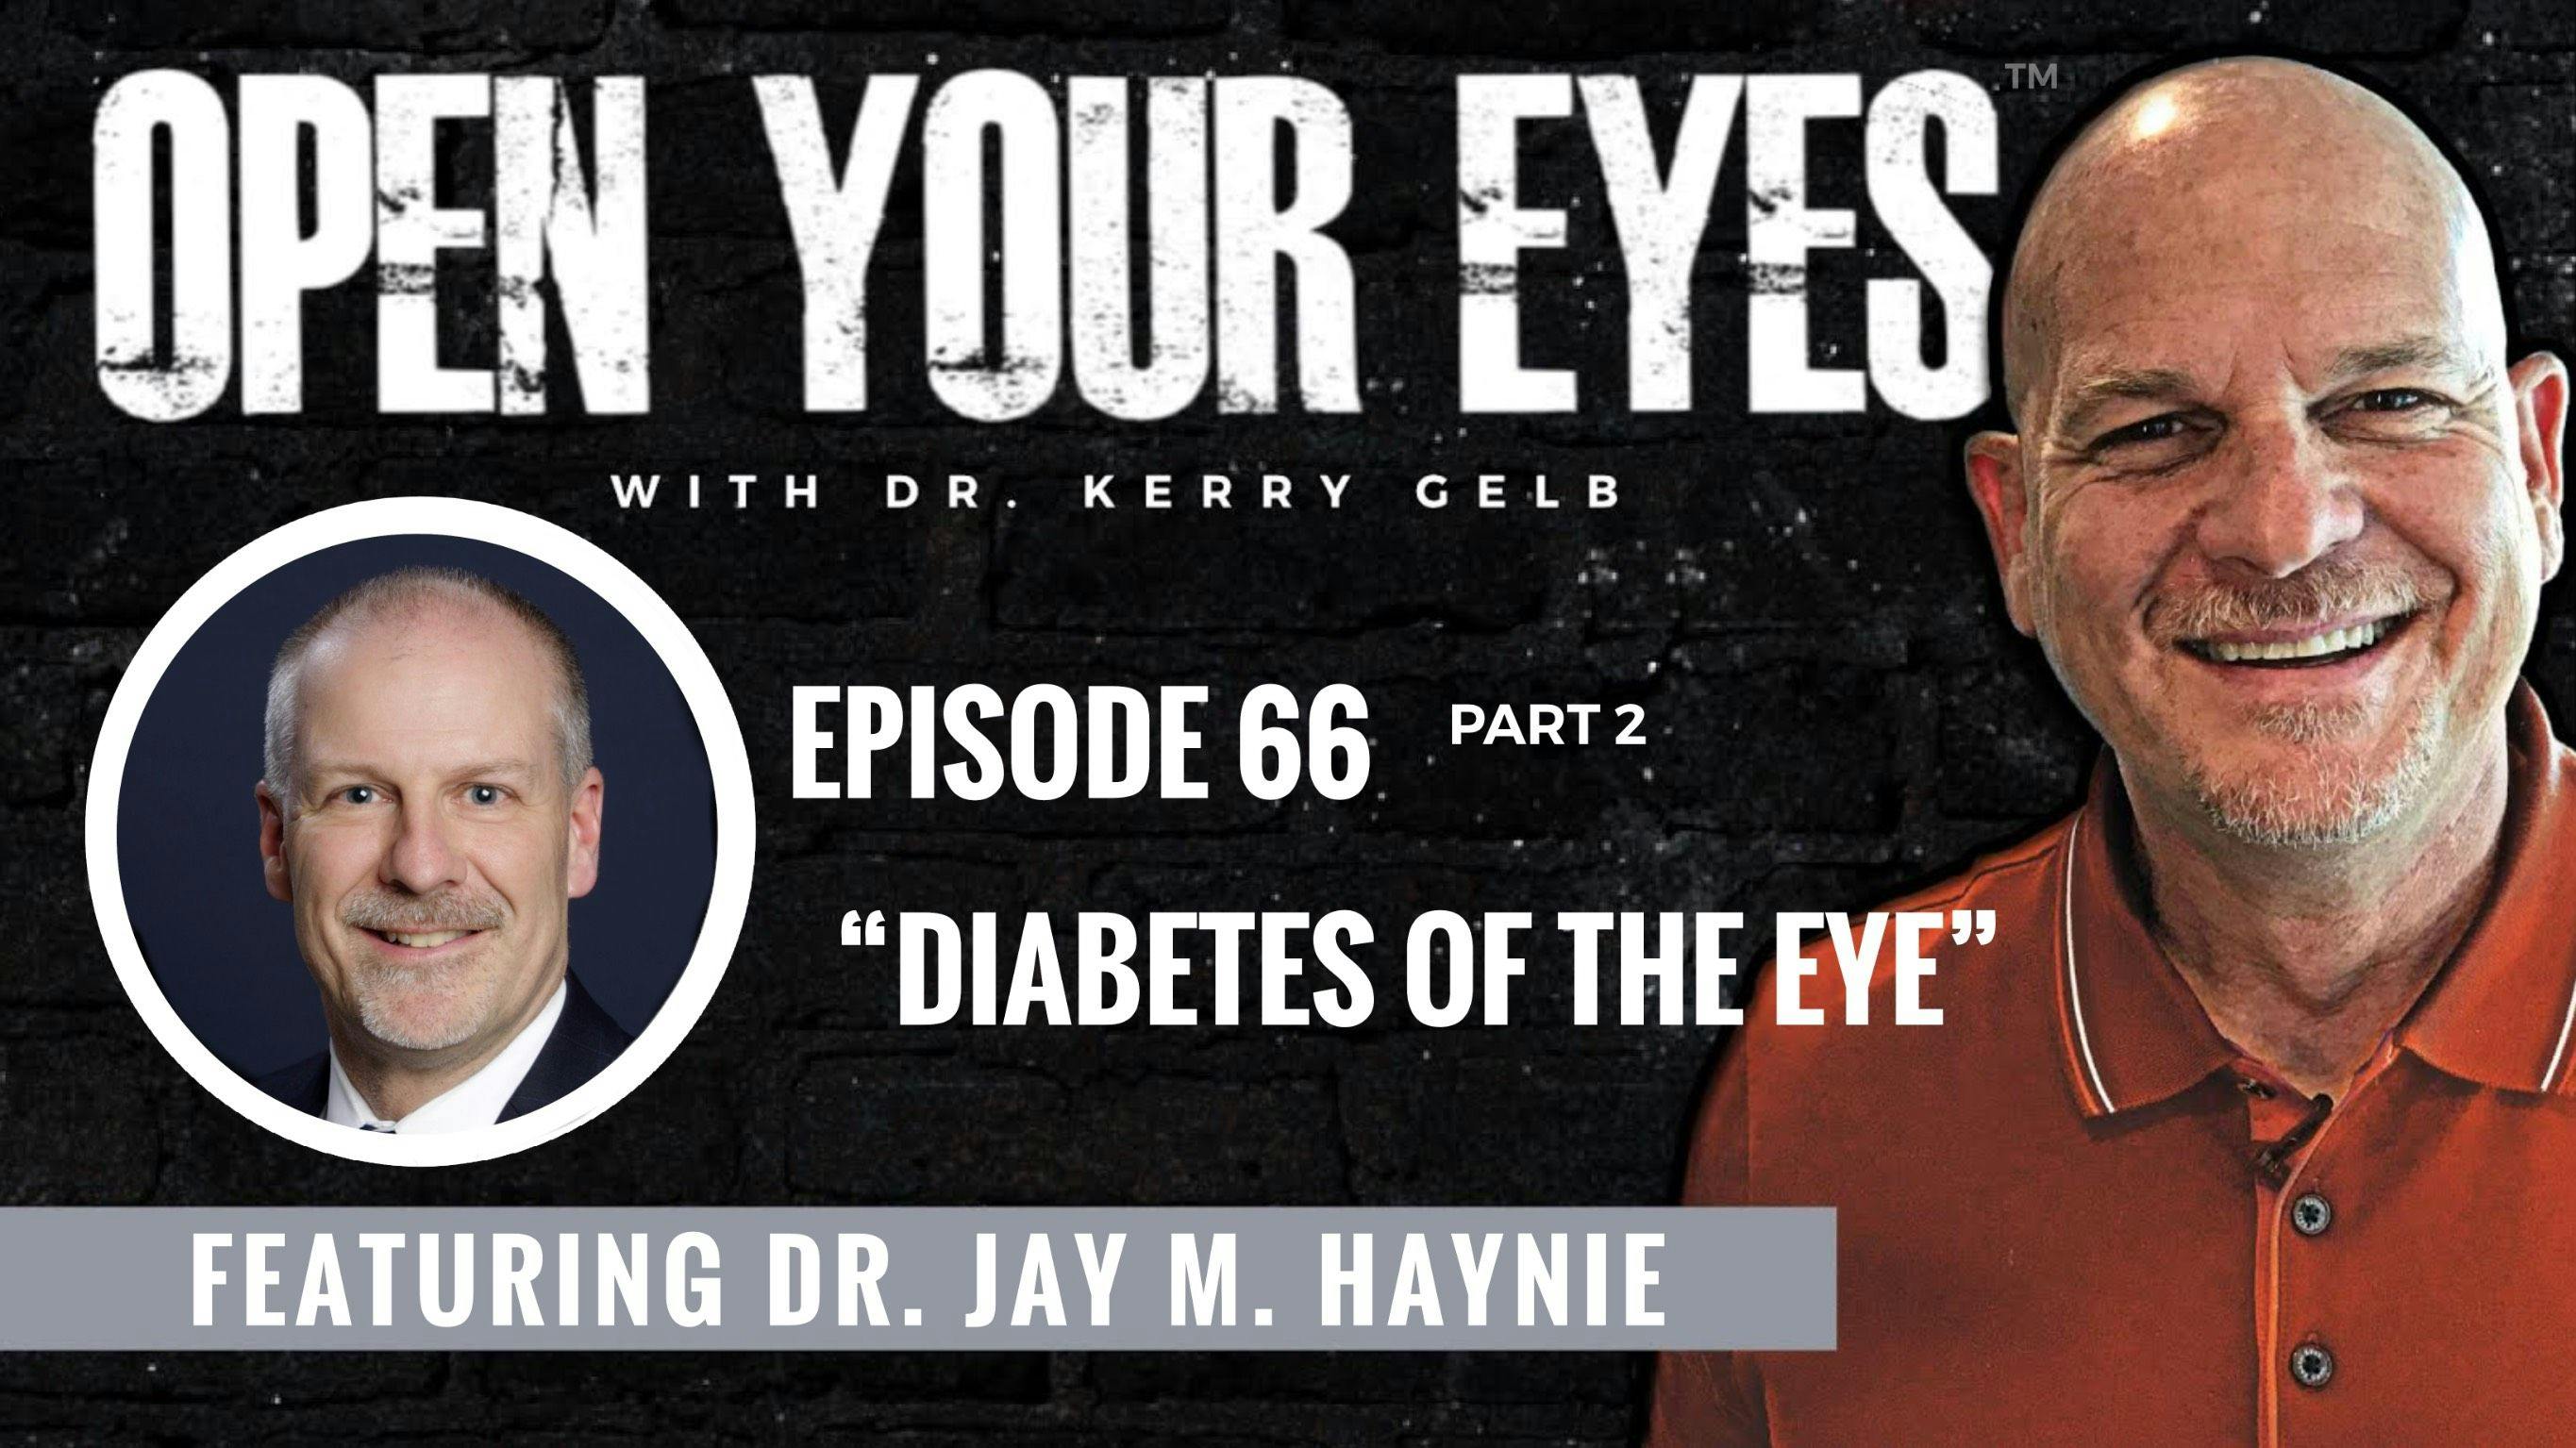 Dr. Kerry Gelb speaks with Dr. Jay M. Hainie in the second part of their discussion on diabetes of the eye! 